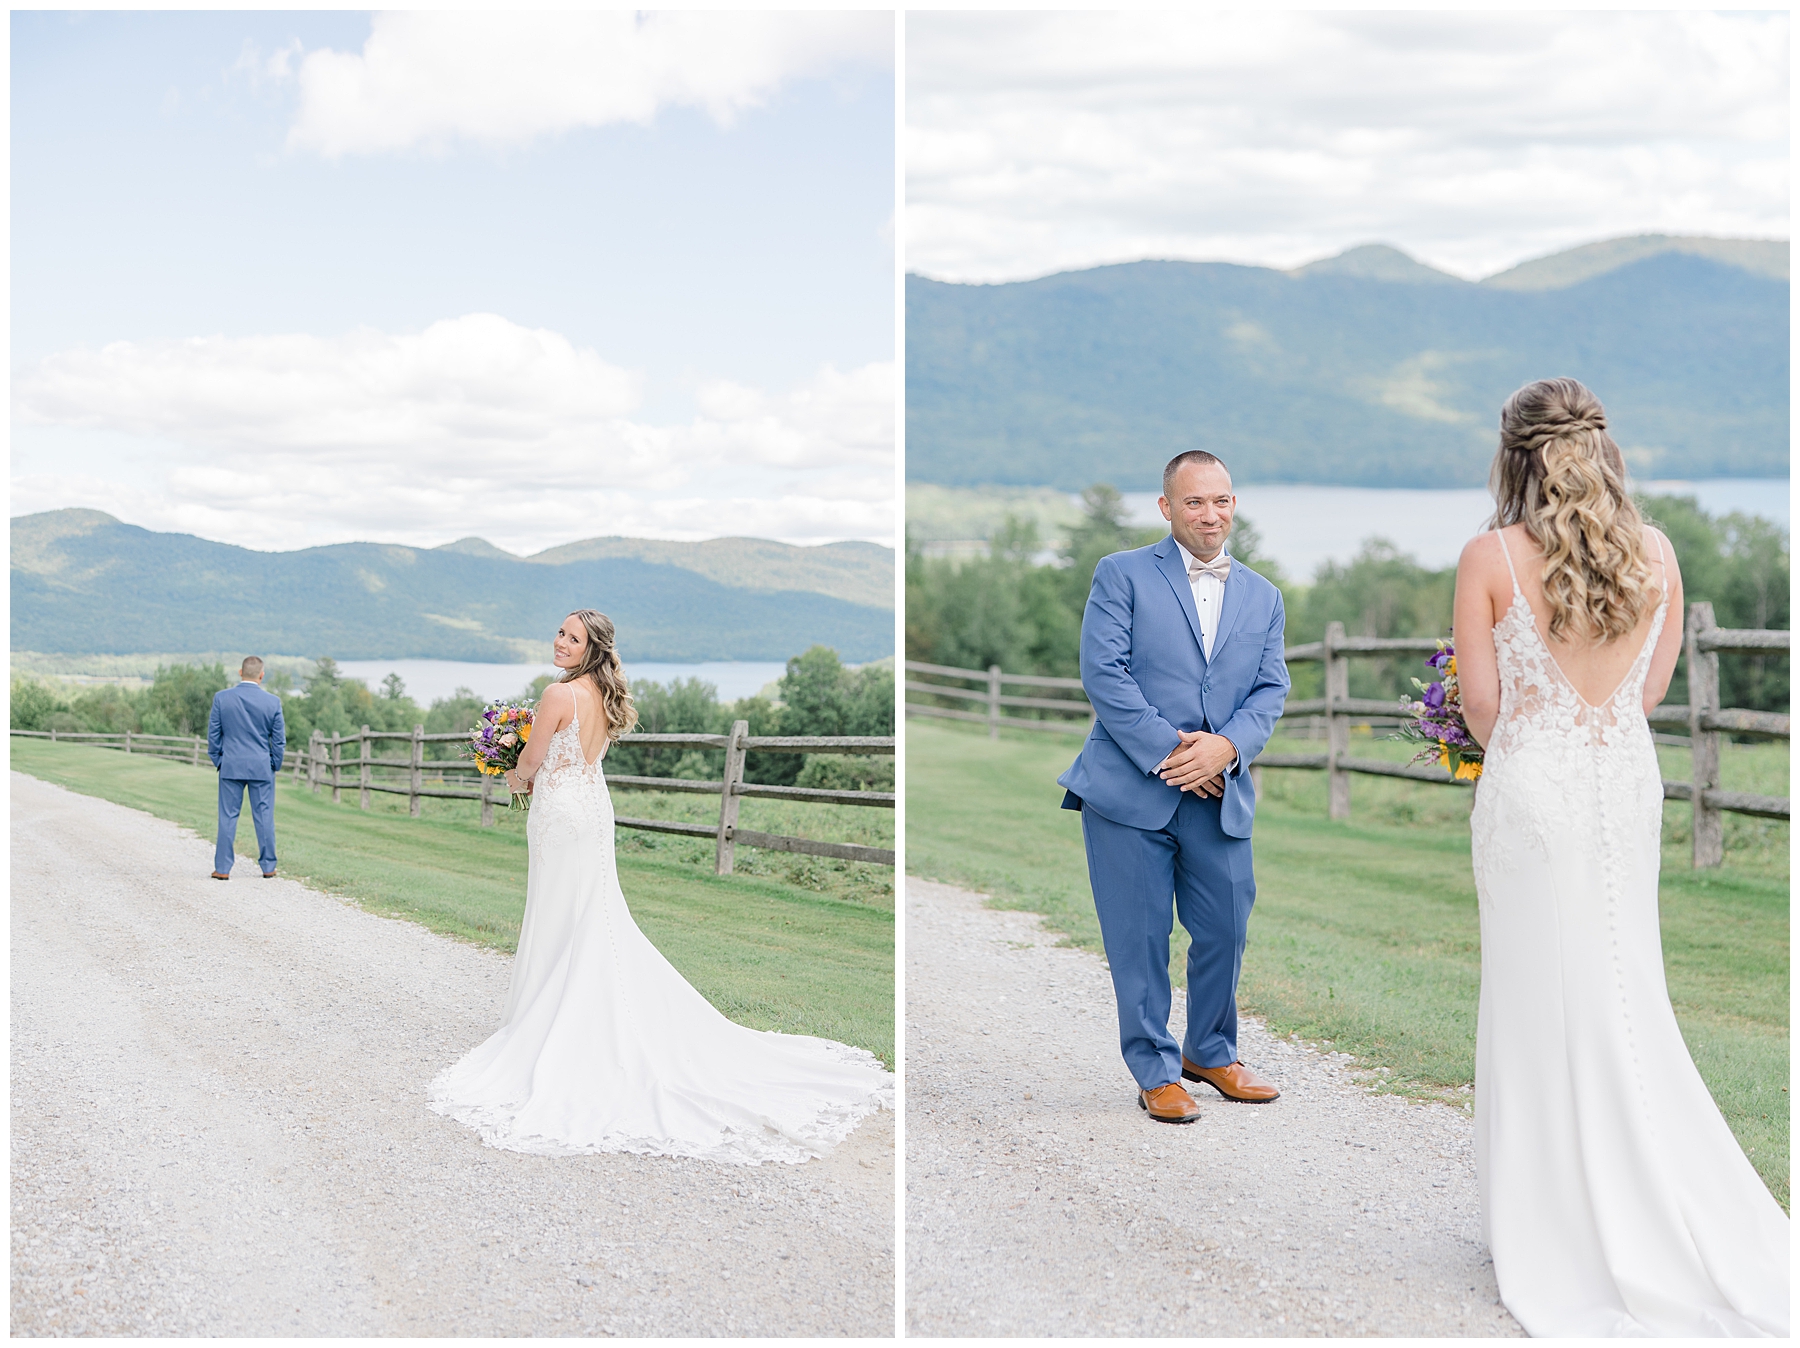 first look before Dreamy Vermont Wedding ceremony at Mountain Top Inn & Resort